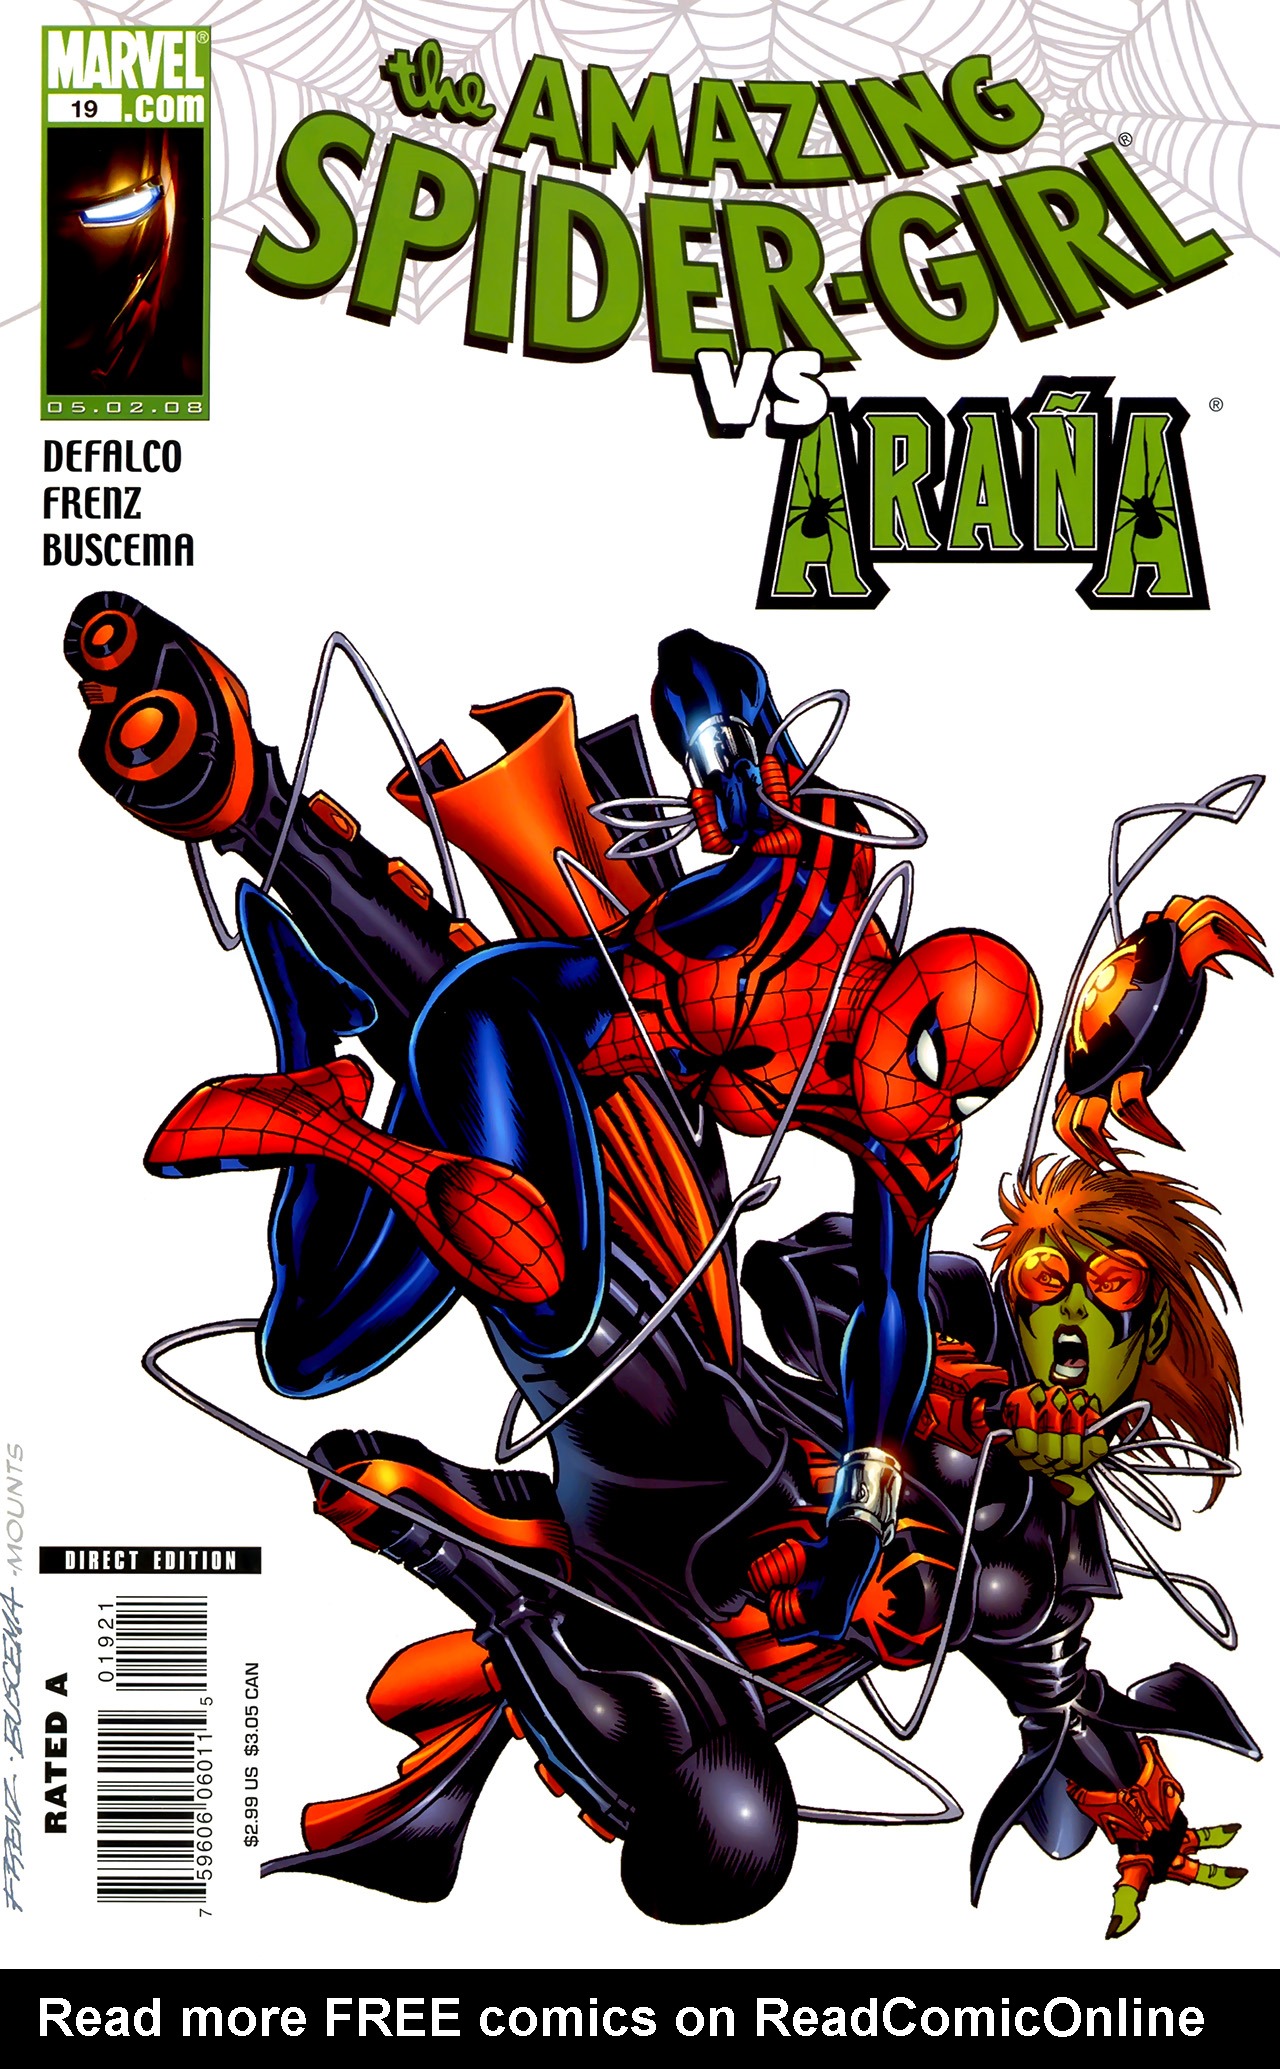 Read online Amazing Spider-Girl comic -  Issue #19 - 2